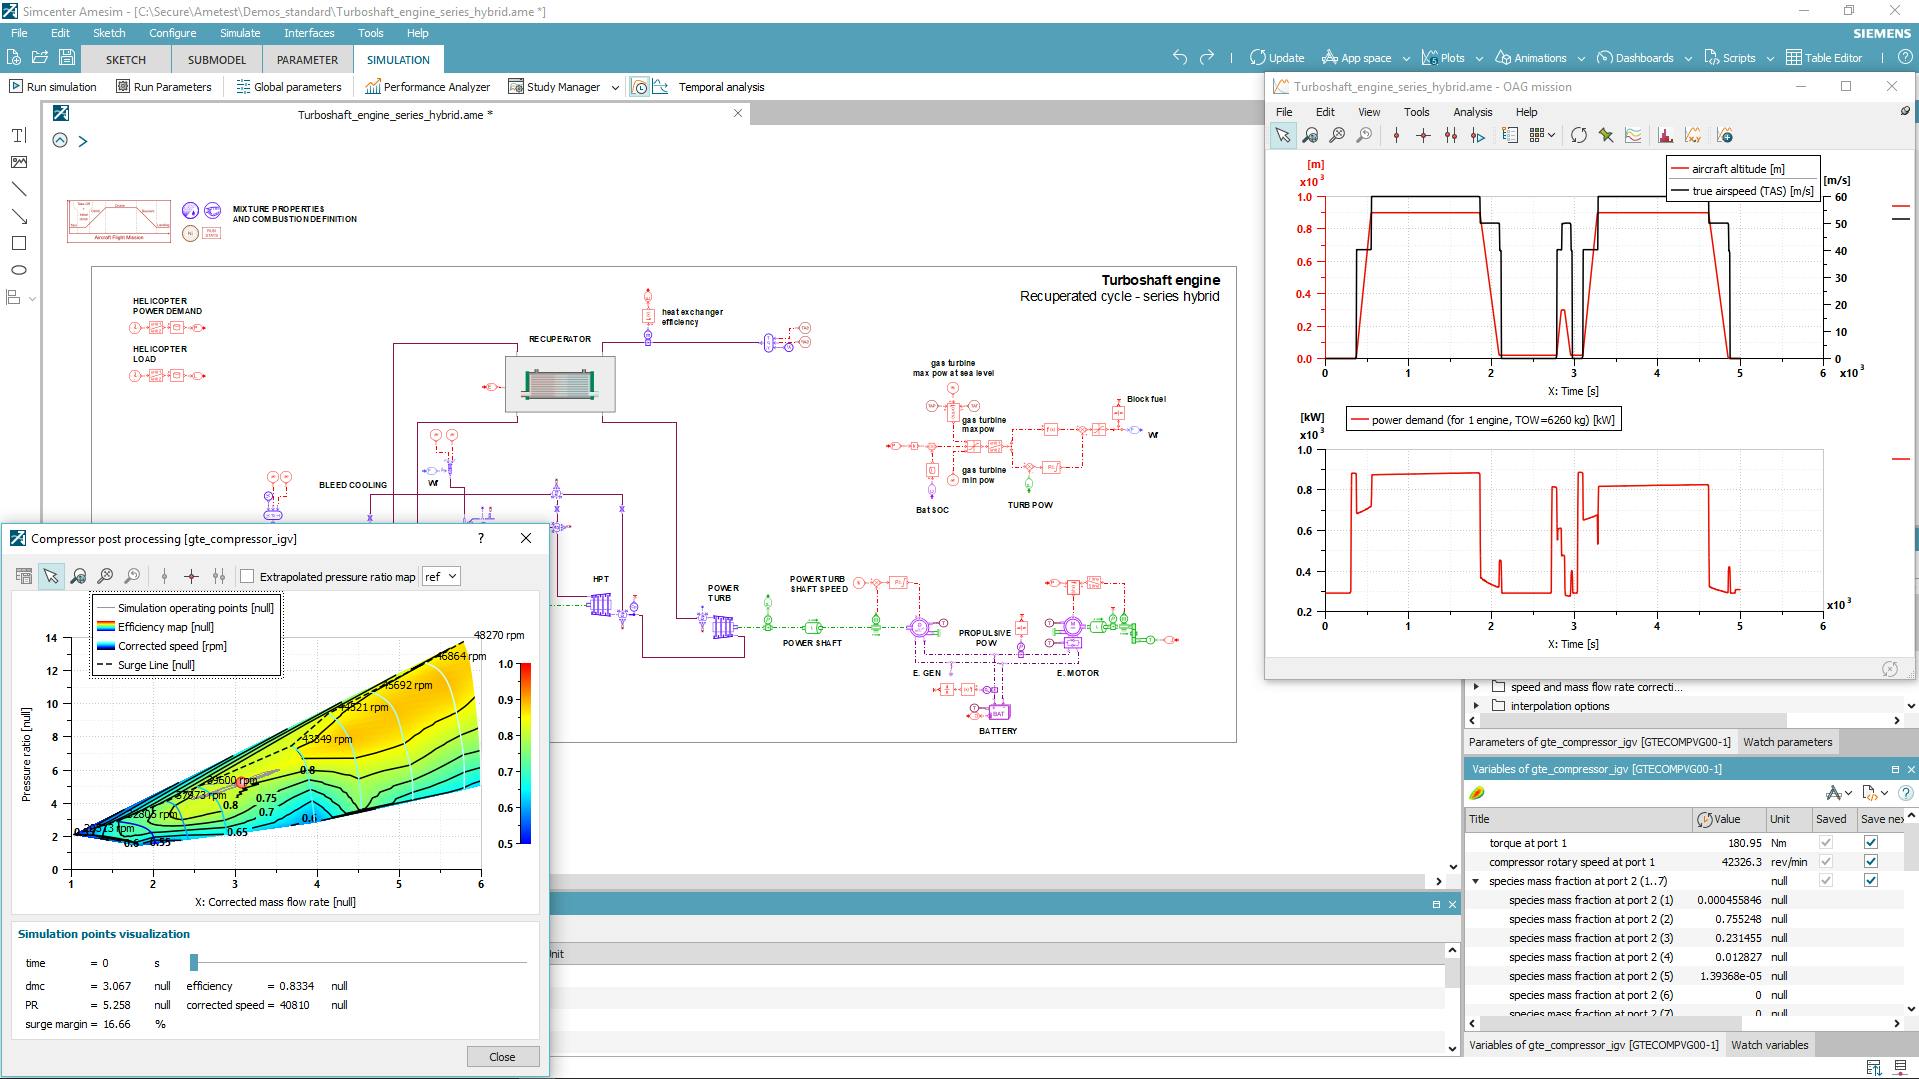 Assessing thermo-electric powerplants for rotorcraft using system simulation